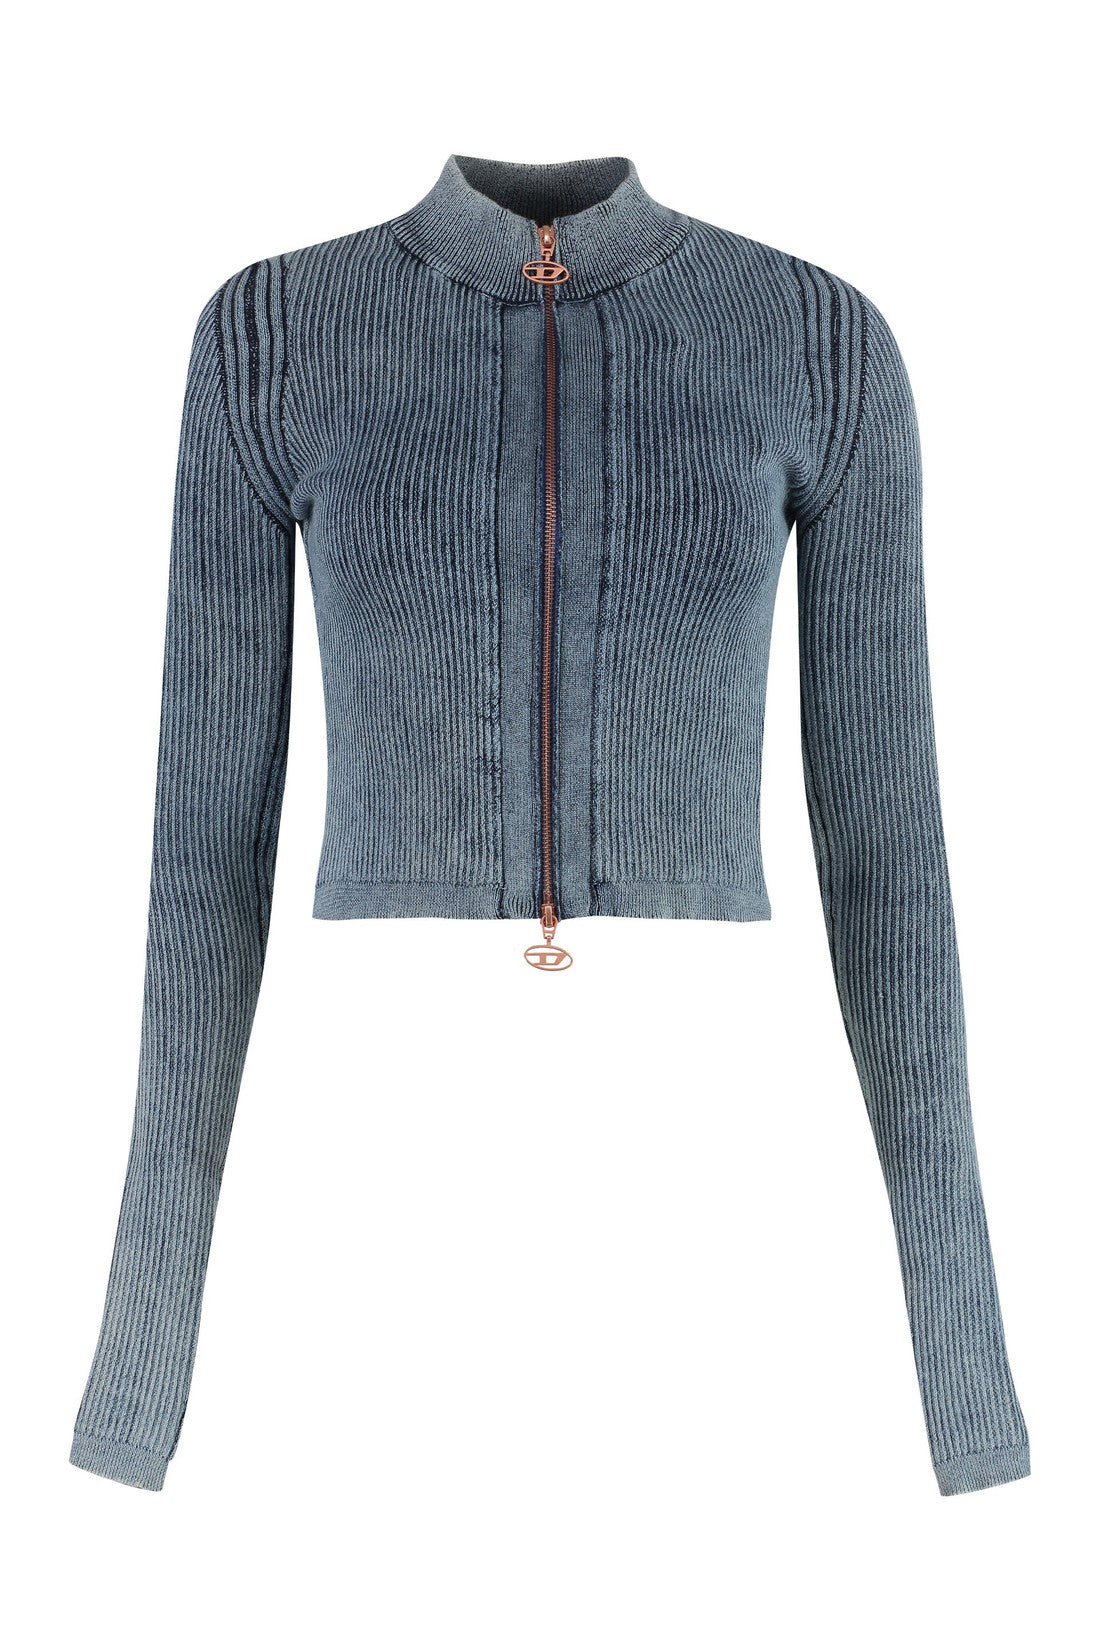 DIESEL-OUTLET-SALE-M-Anafi zipped cardigan-ARCHIVIST